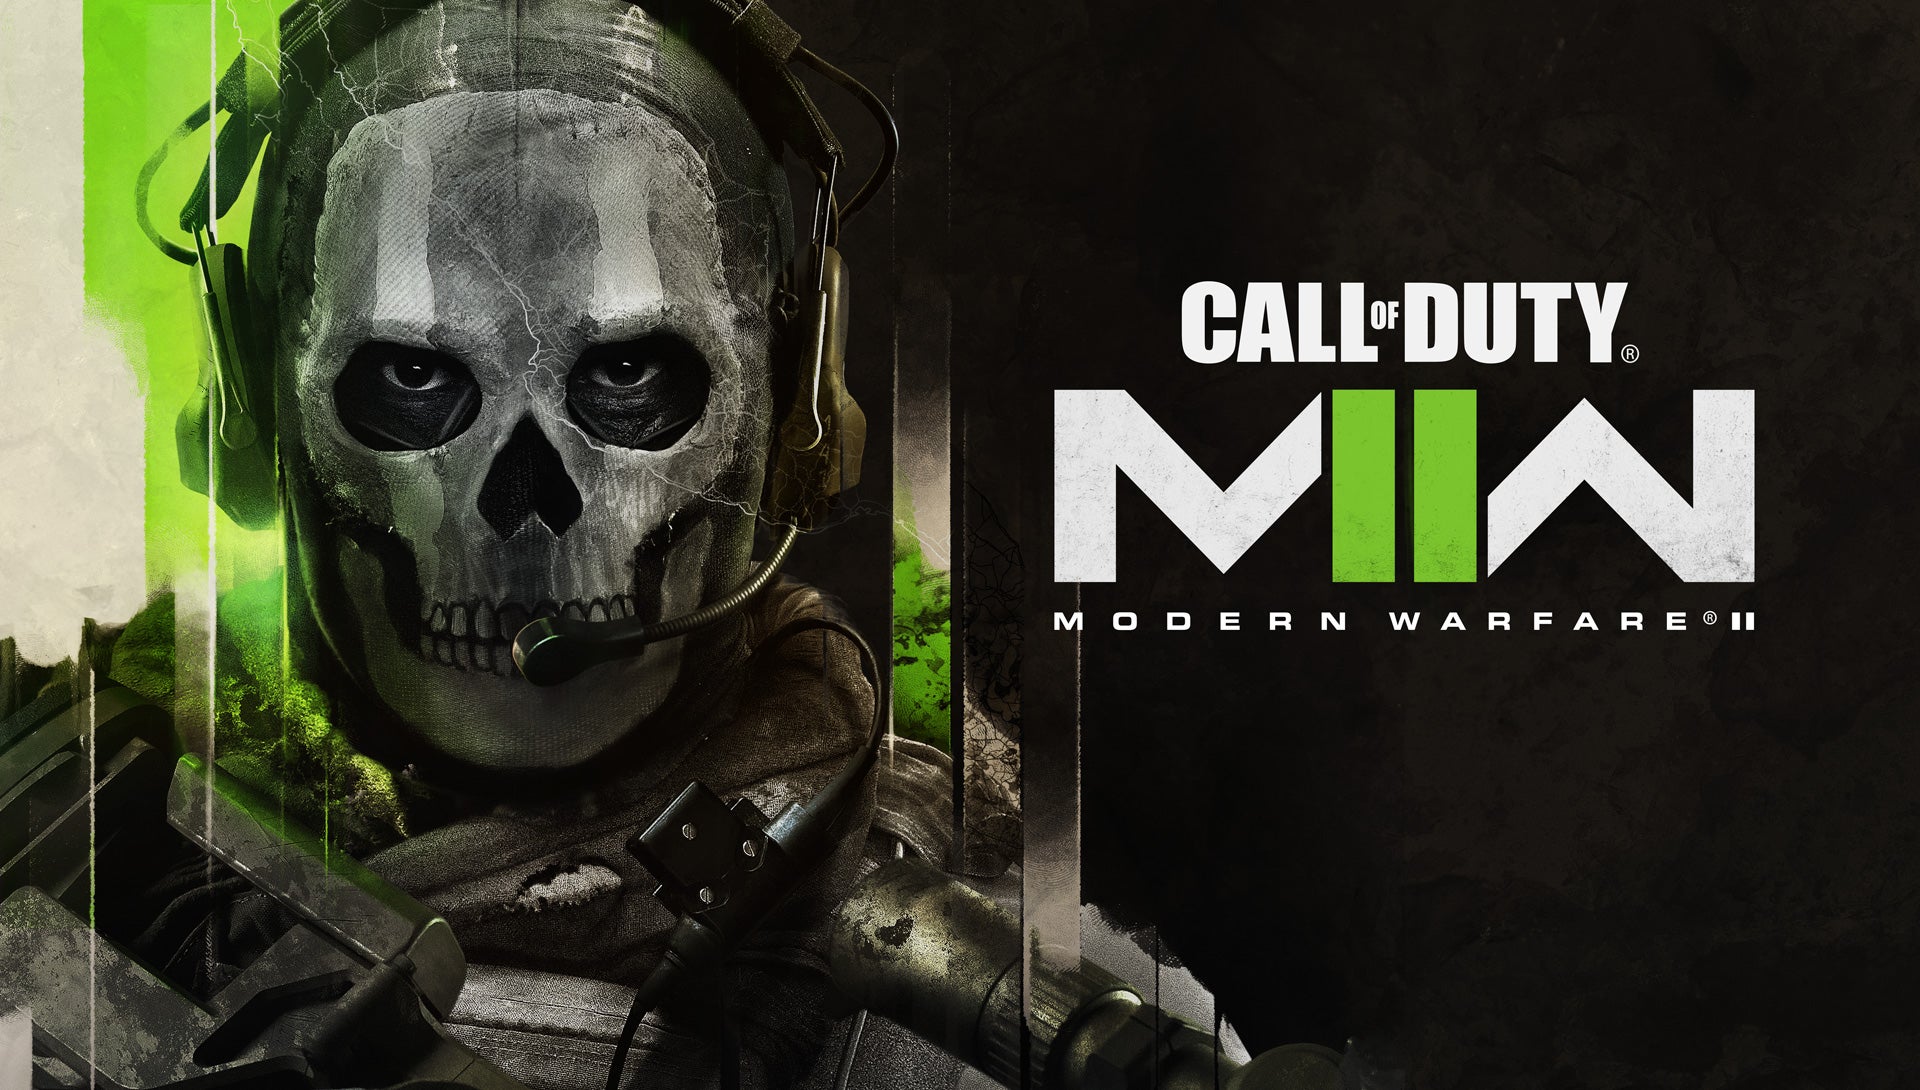 Image for The Modern Warfare 2 reveal trailer has leaked hours ahead of its official reveal